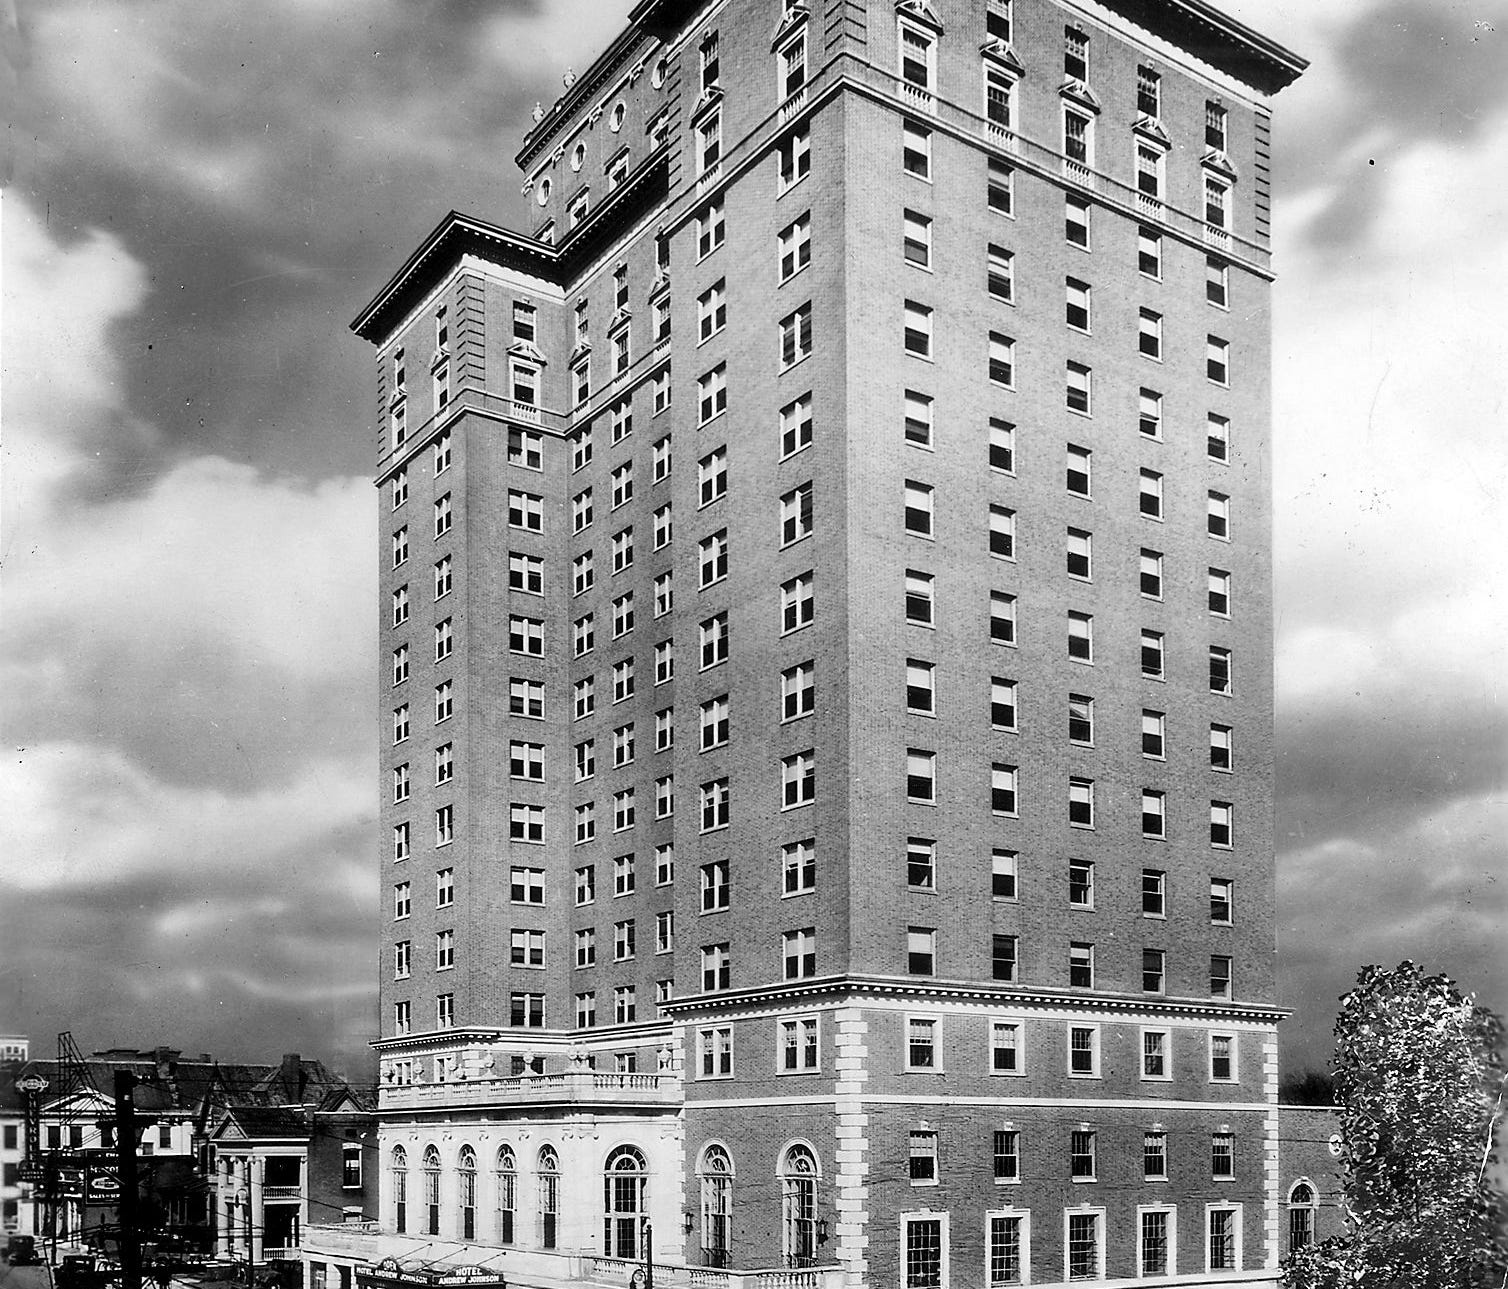 Ca 1930's photograph of the Andrew Johnson Hotel.